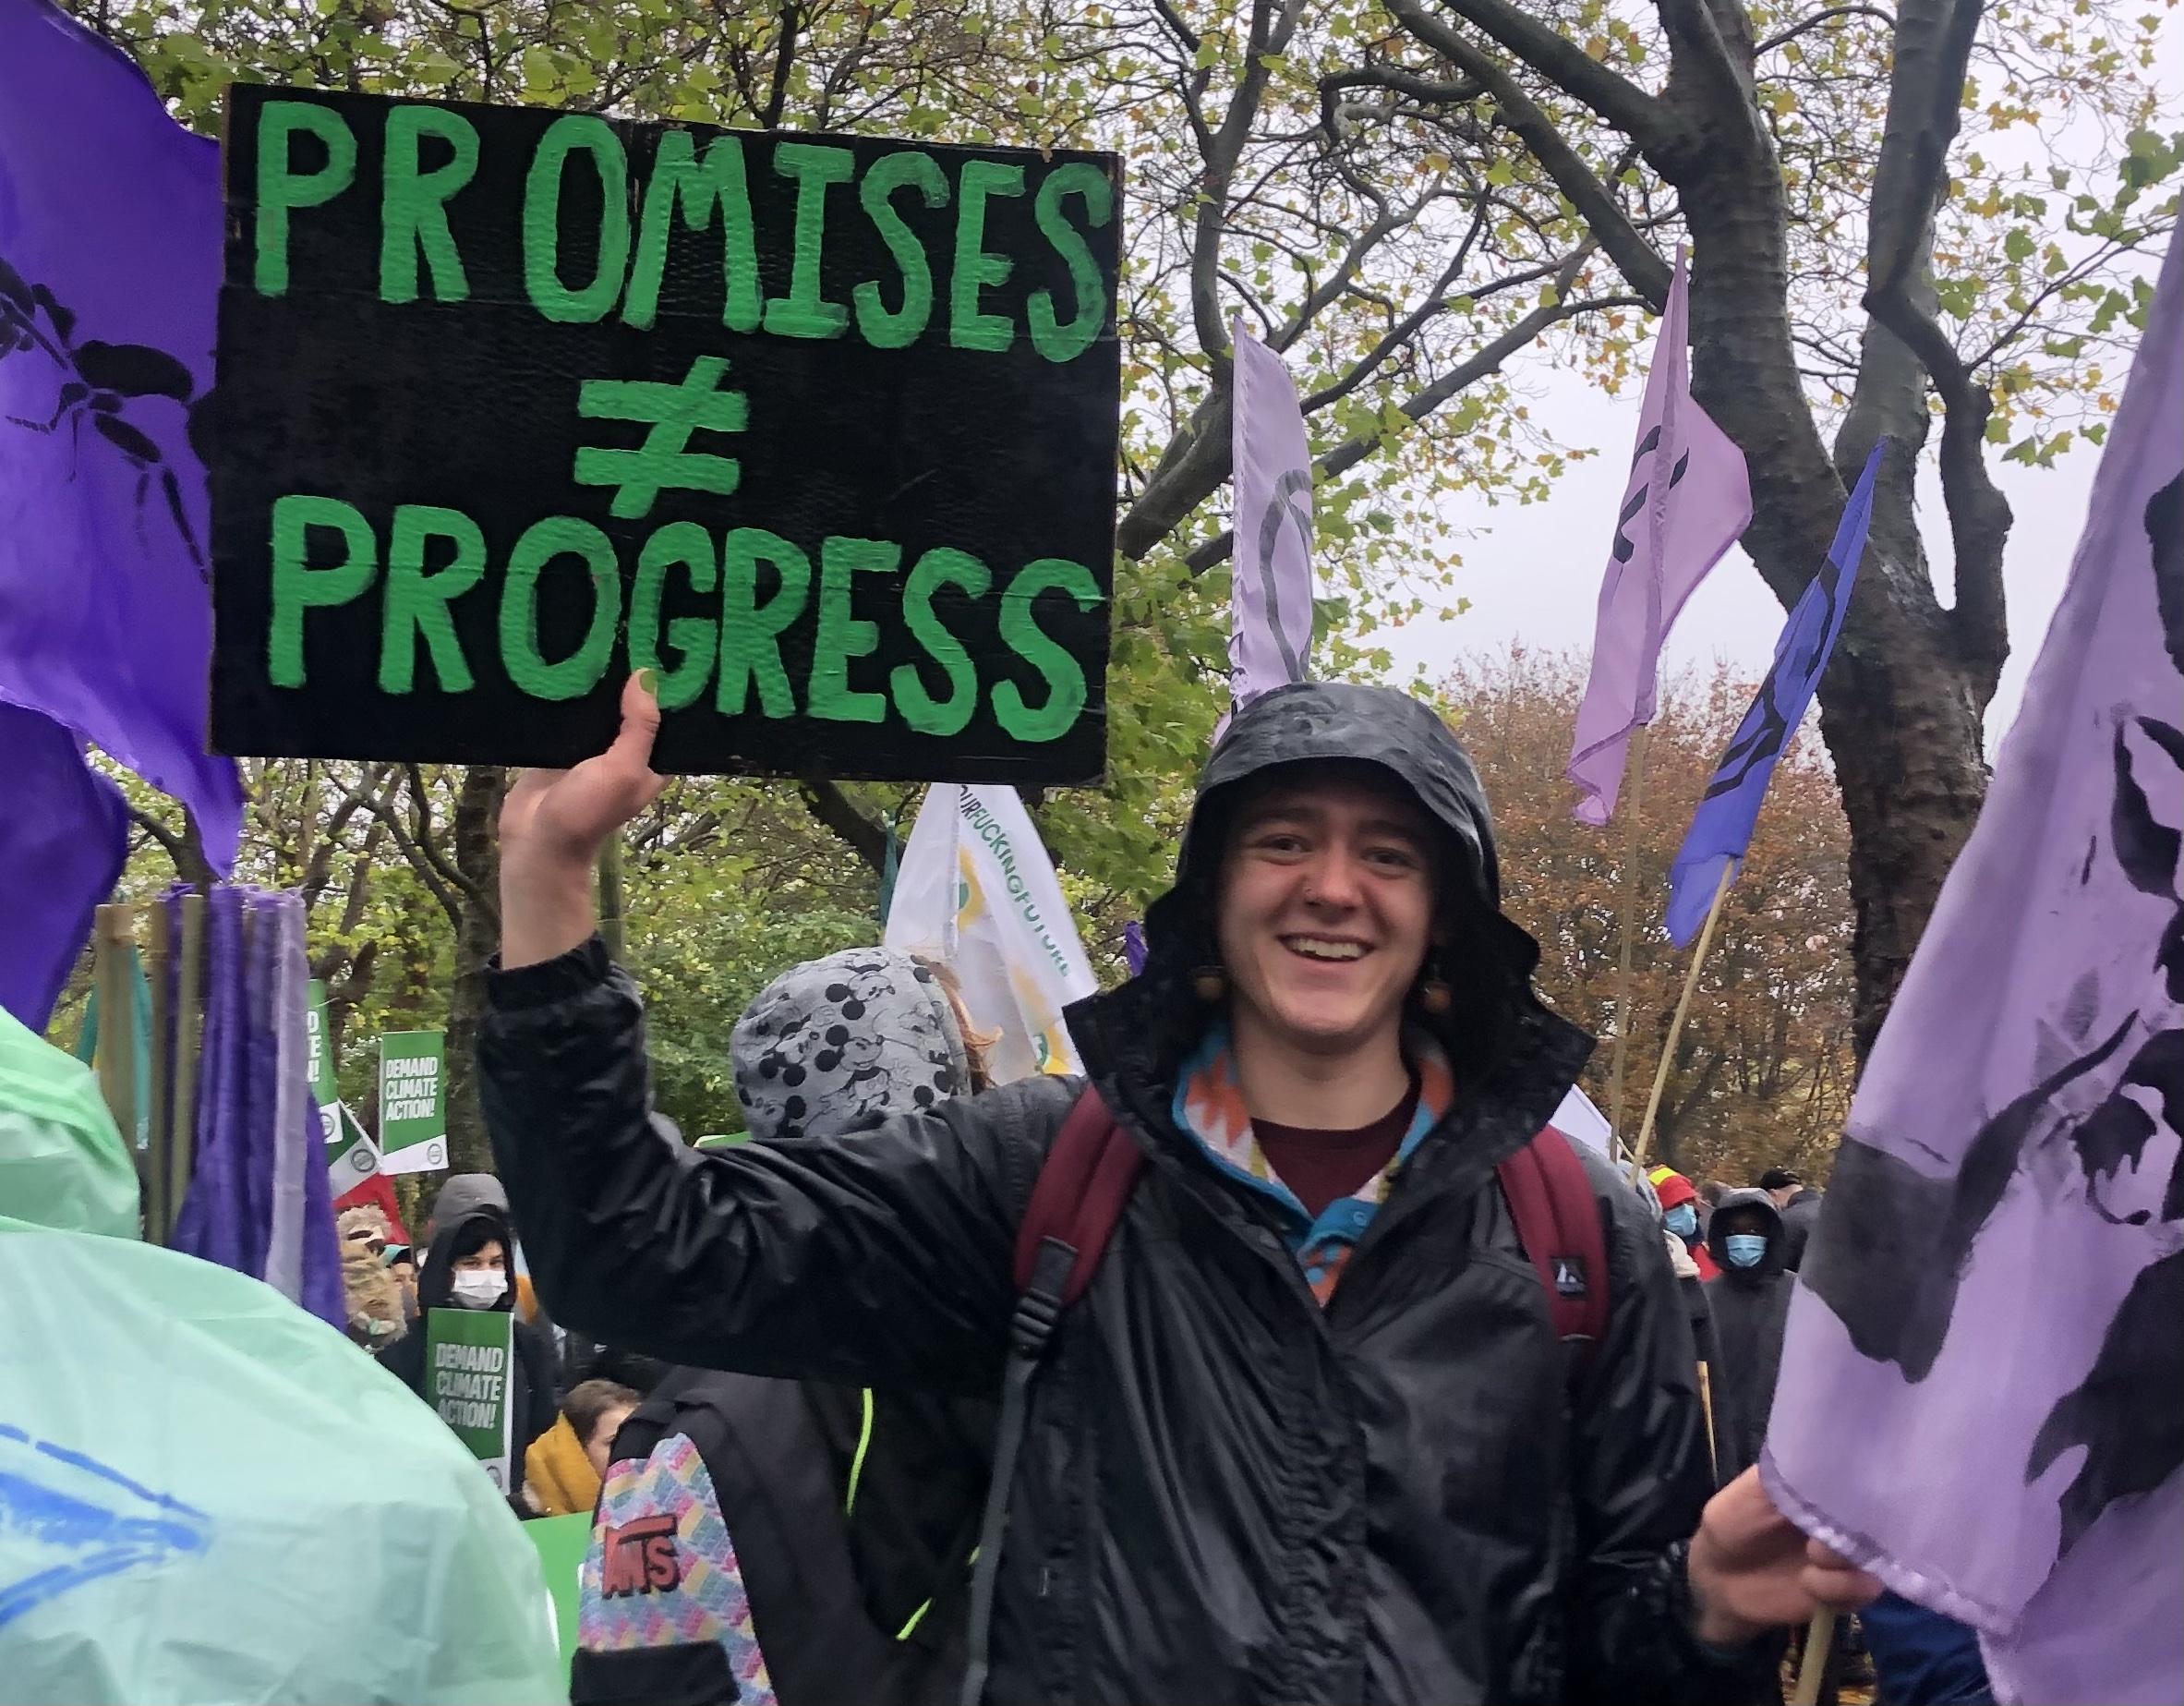 Nick Koeing, in a wet rain jacket at a protest, holding a placard with a black background and writing in green reading 'promises do not equal progress'